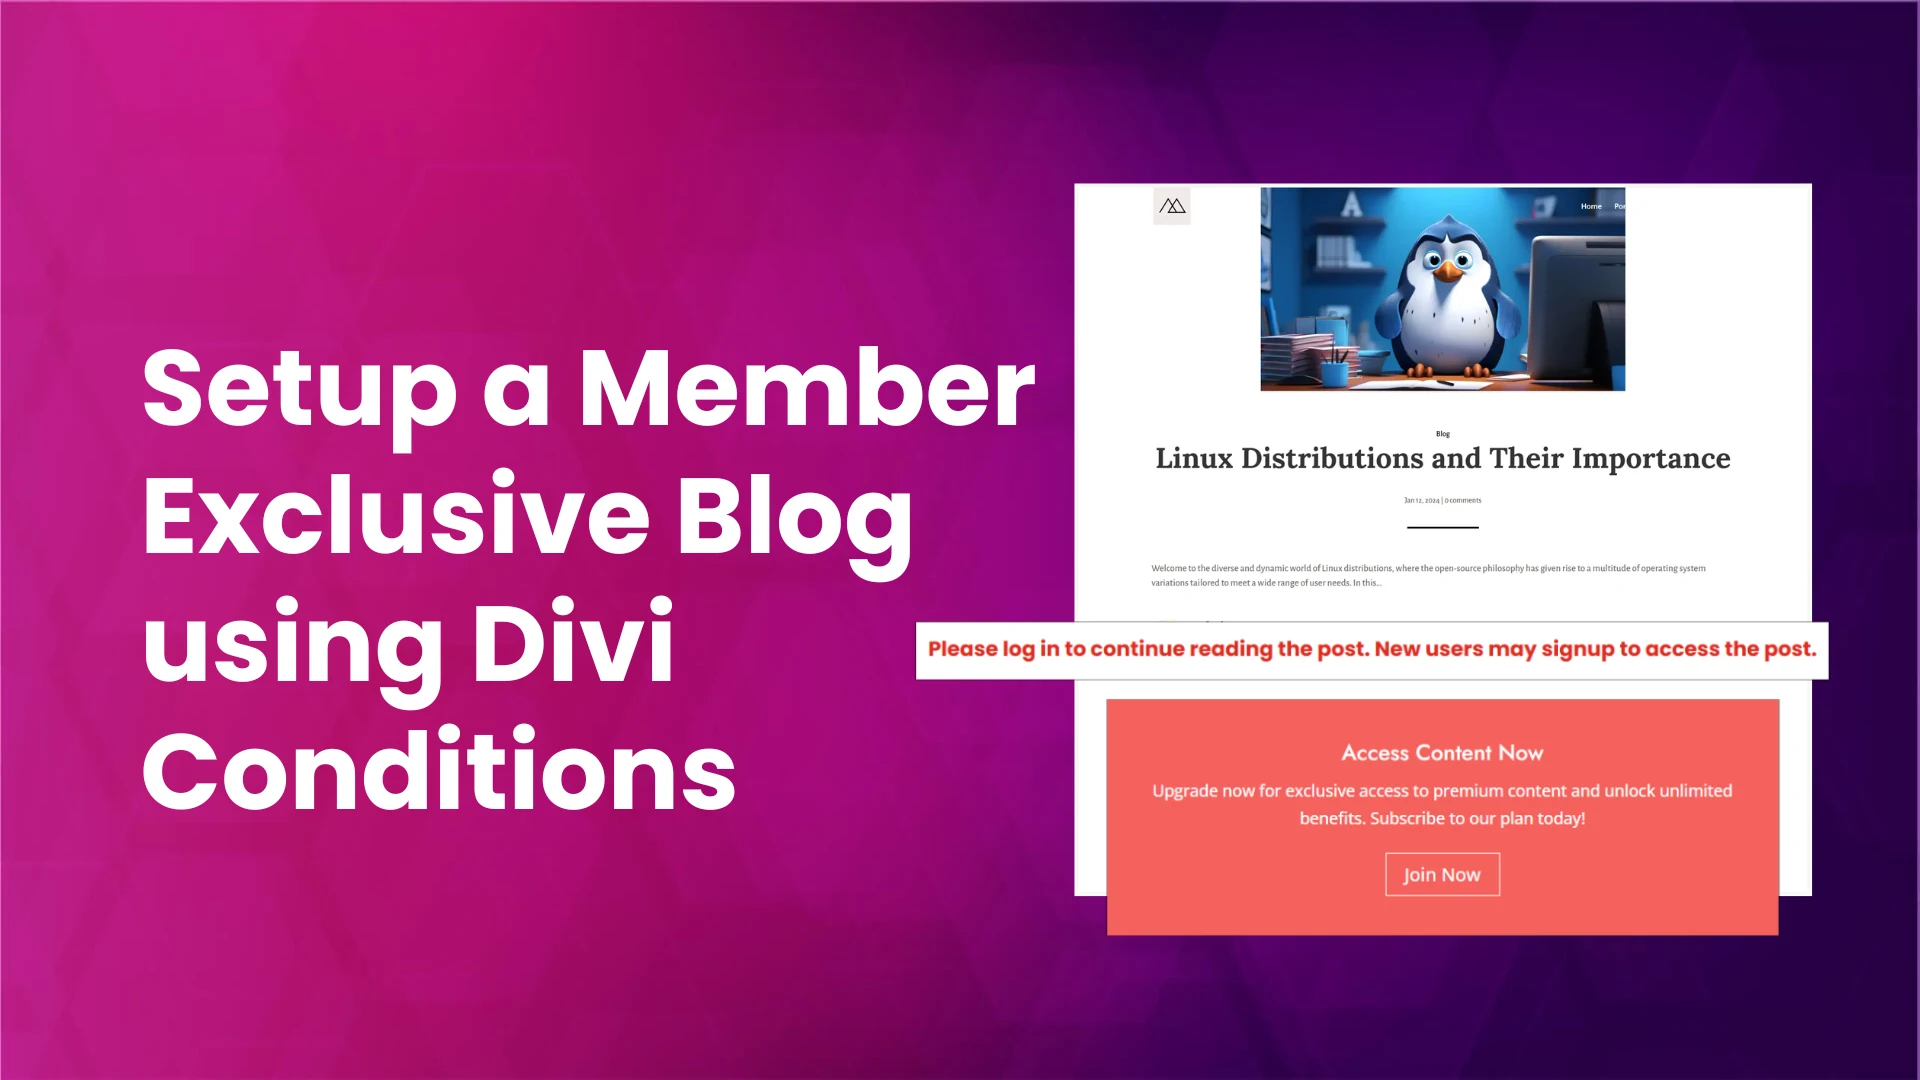 Divi conditions to create member exclusive blog.